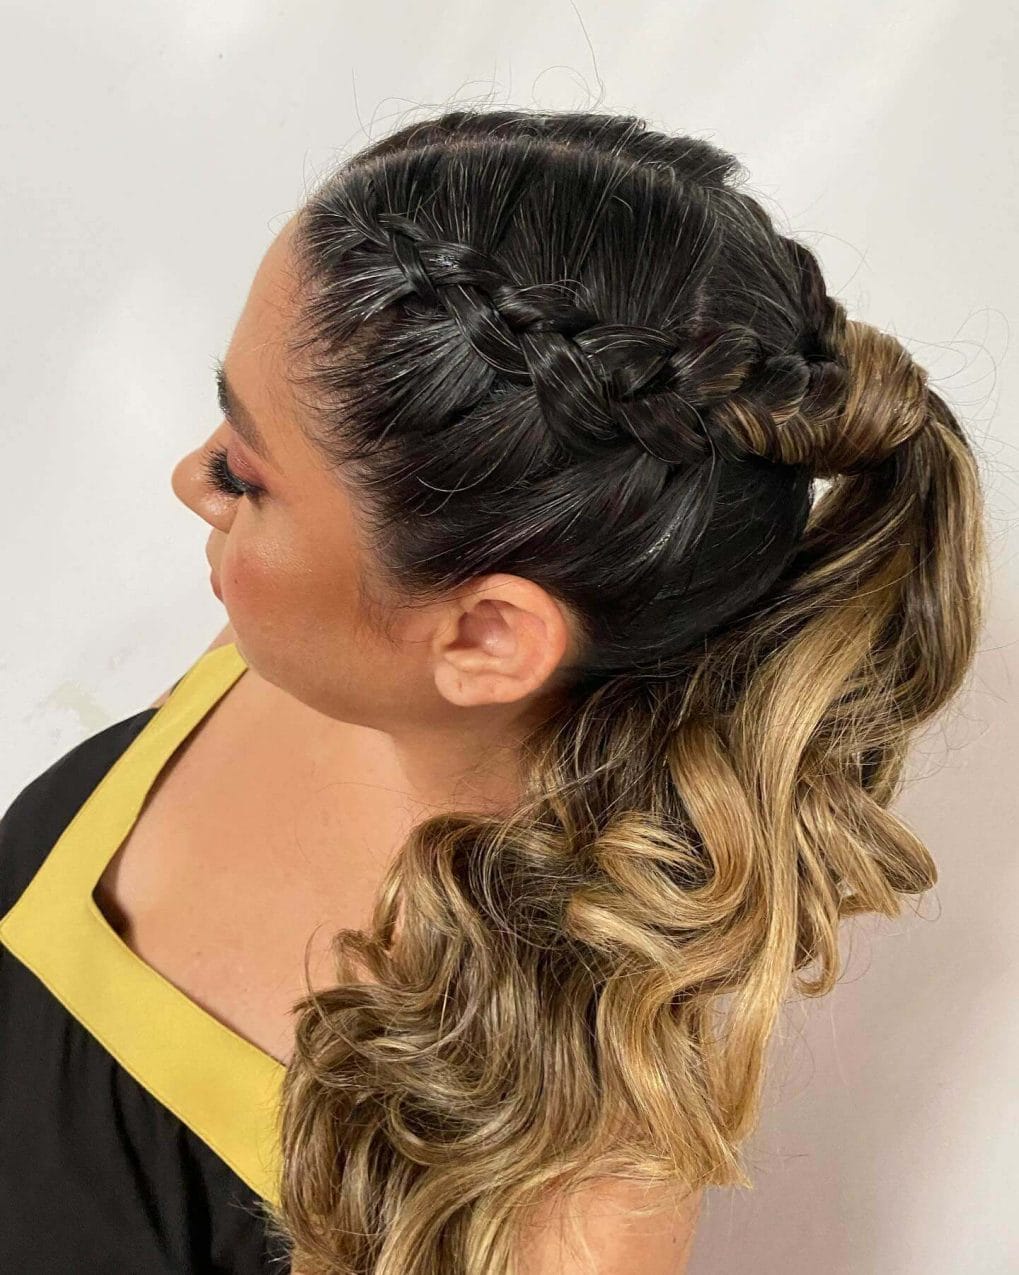 Braided crown circles the head above a sun-kissed curly ponytail